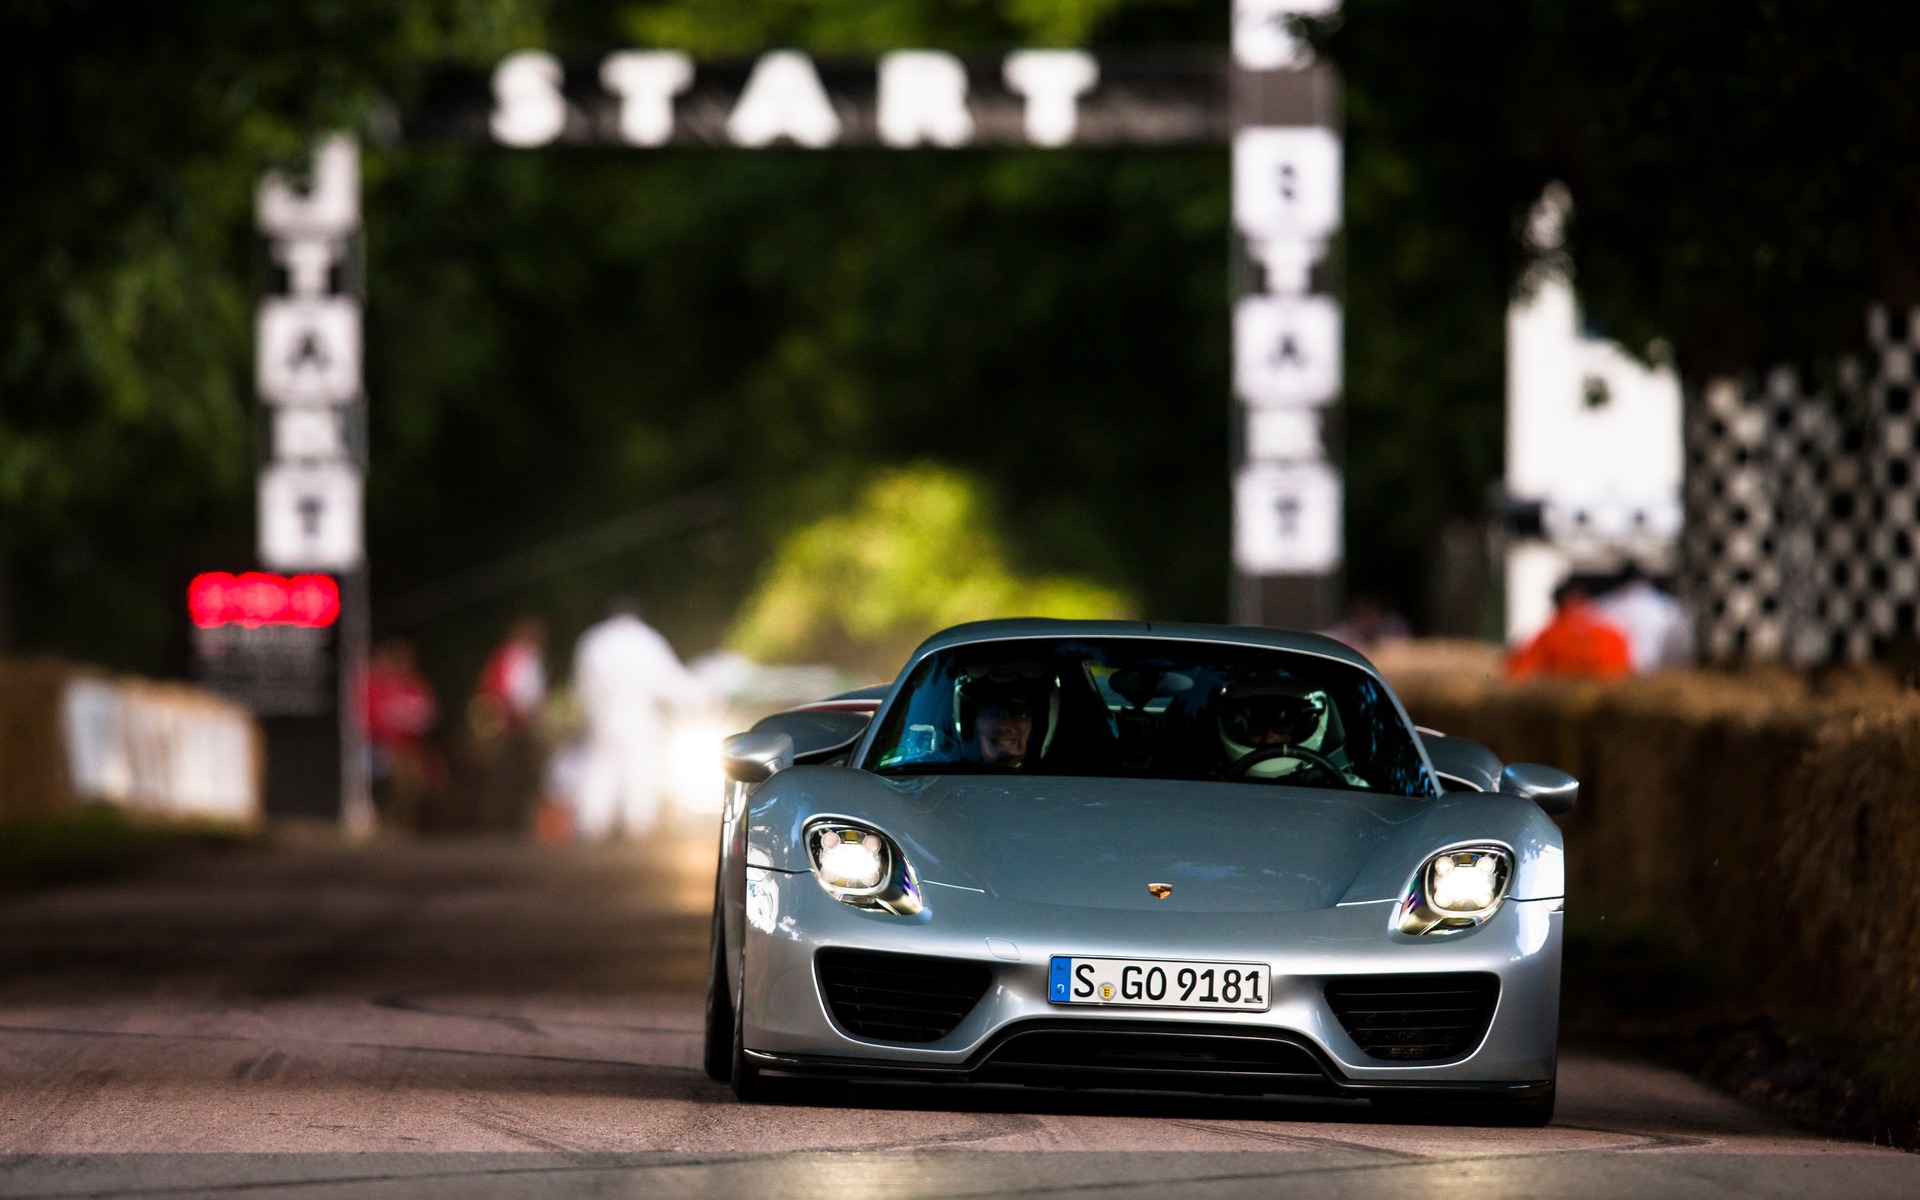 Porsche 918 Spyder in action at the Festival of Speed 2016